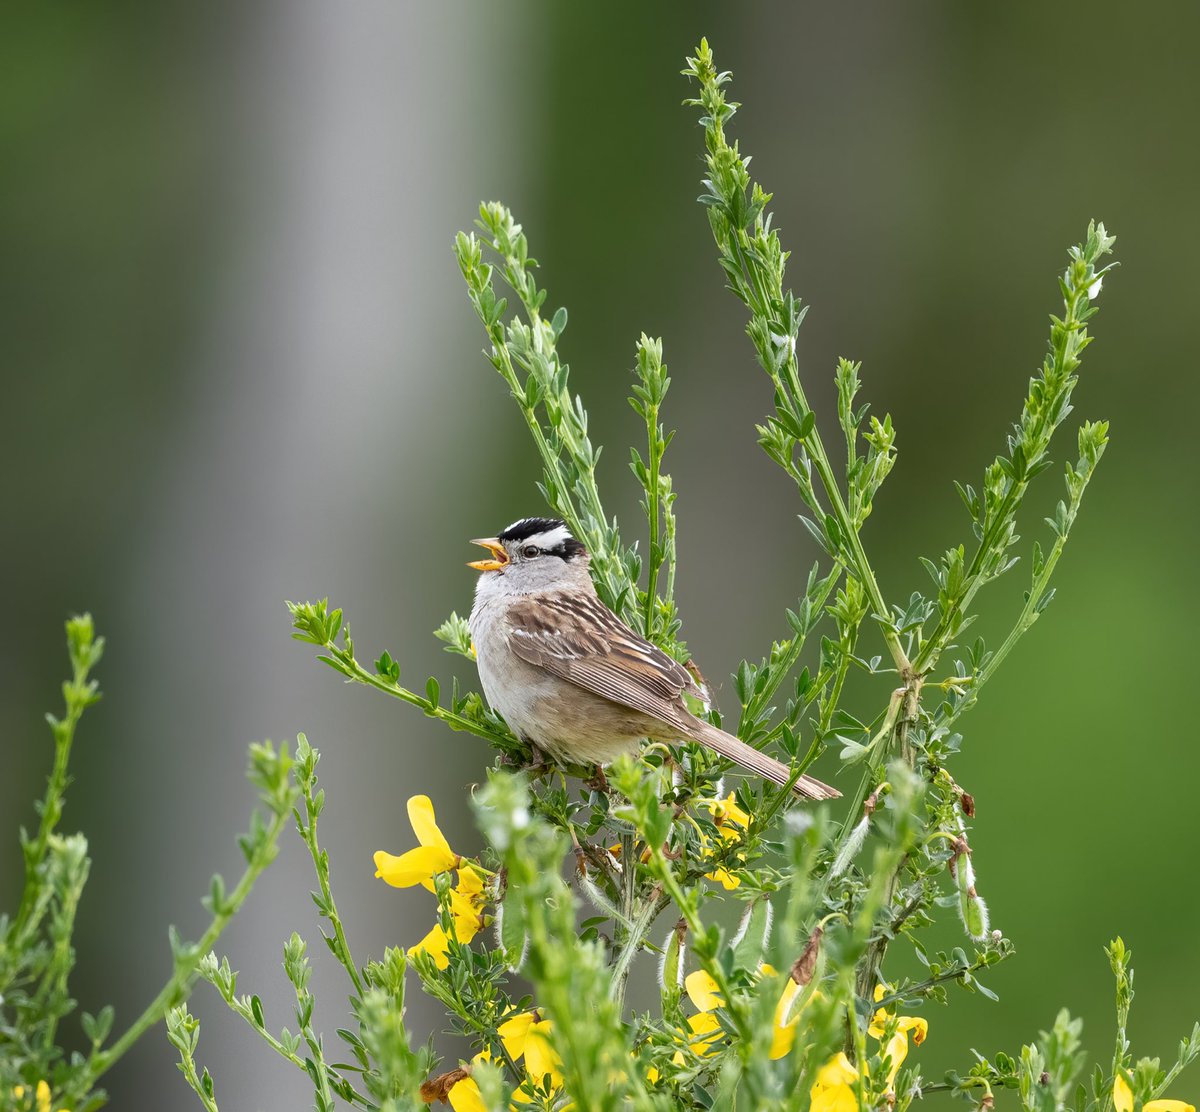 White-crowned sparrows were the theme song at scatter creek! Unfortunately it’s perched on scotch broom, a plant that easily overtakes native habitat and reduces biodiversity. Pretty bird though! 😍

#whitecrownedsparrow #sparrows #birds #twitternaturecommunity #birdphotography